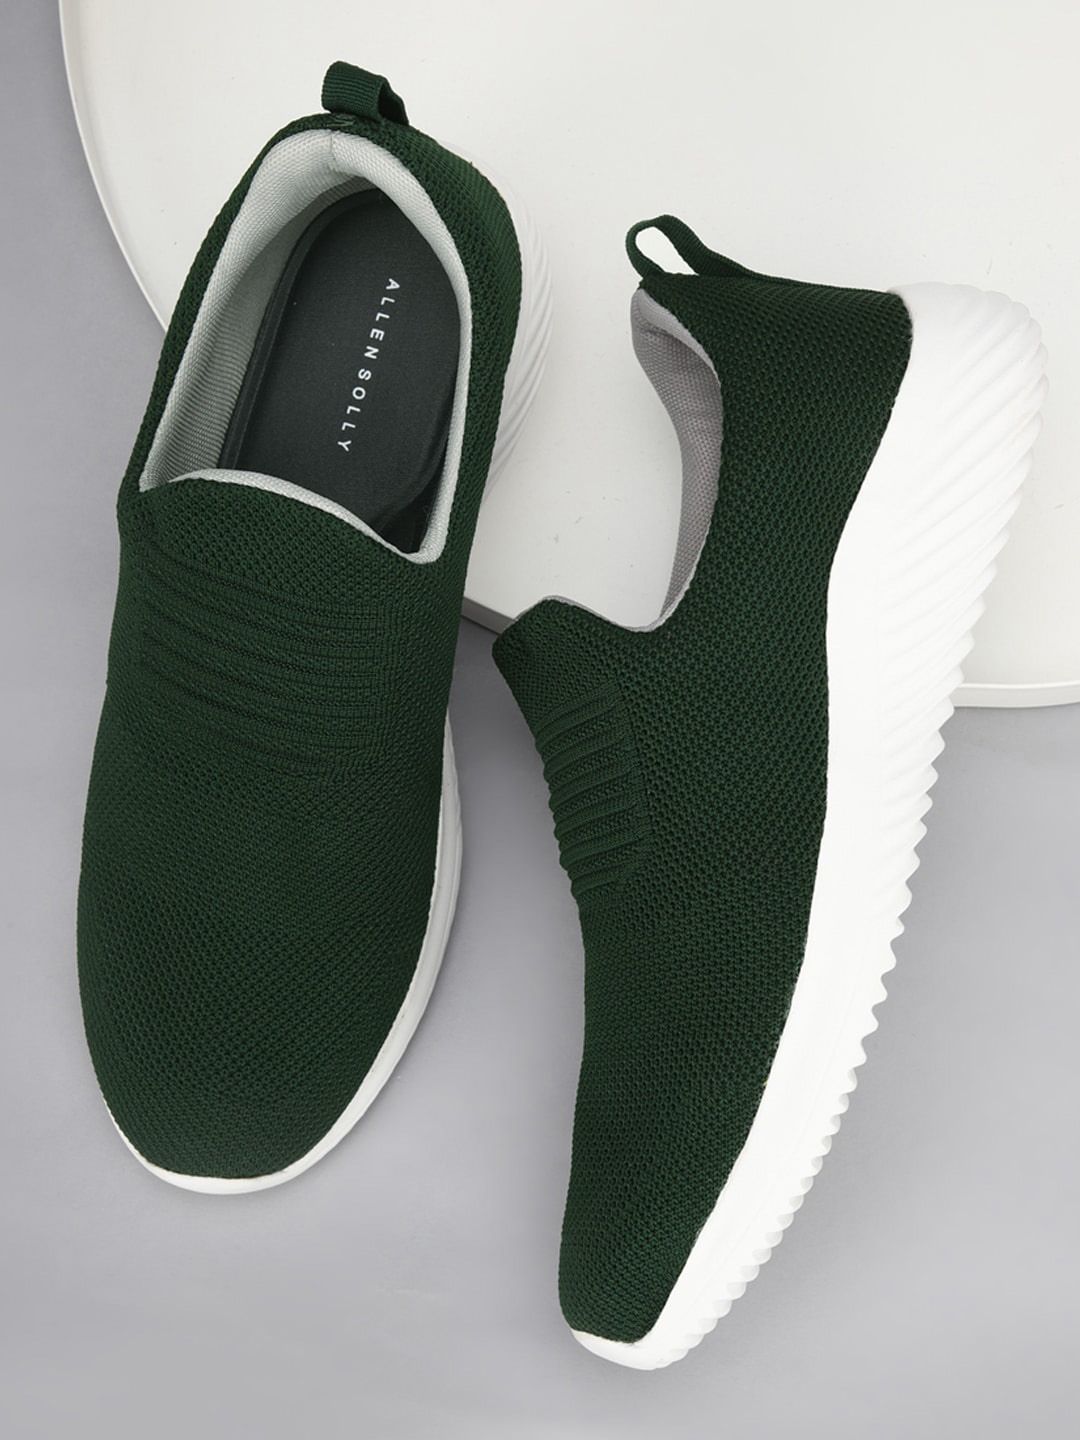 Allen Solly Woman Women Green Textured PU Slip-On Sneakers Price in India